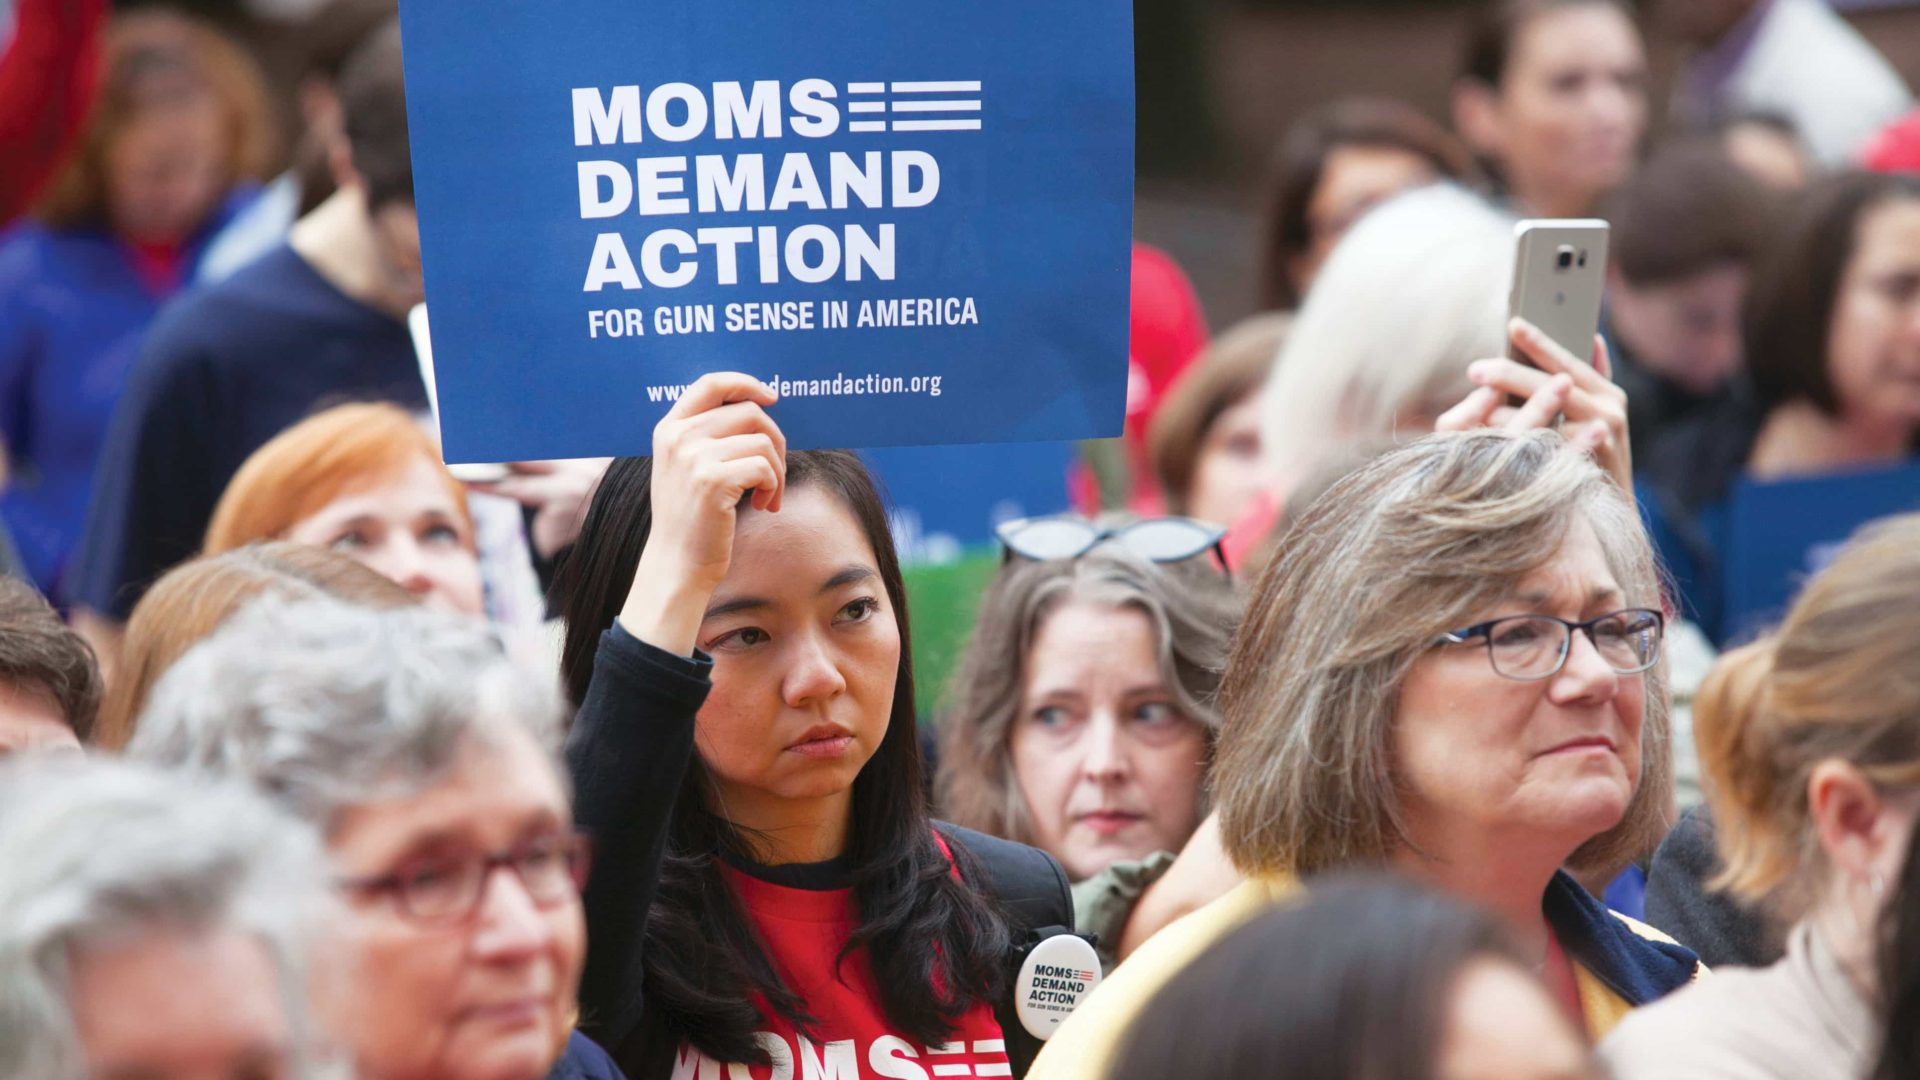 Disarming Domestic Abusers - Moms Demand Action | Moms Demand Action